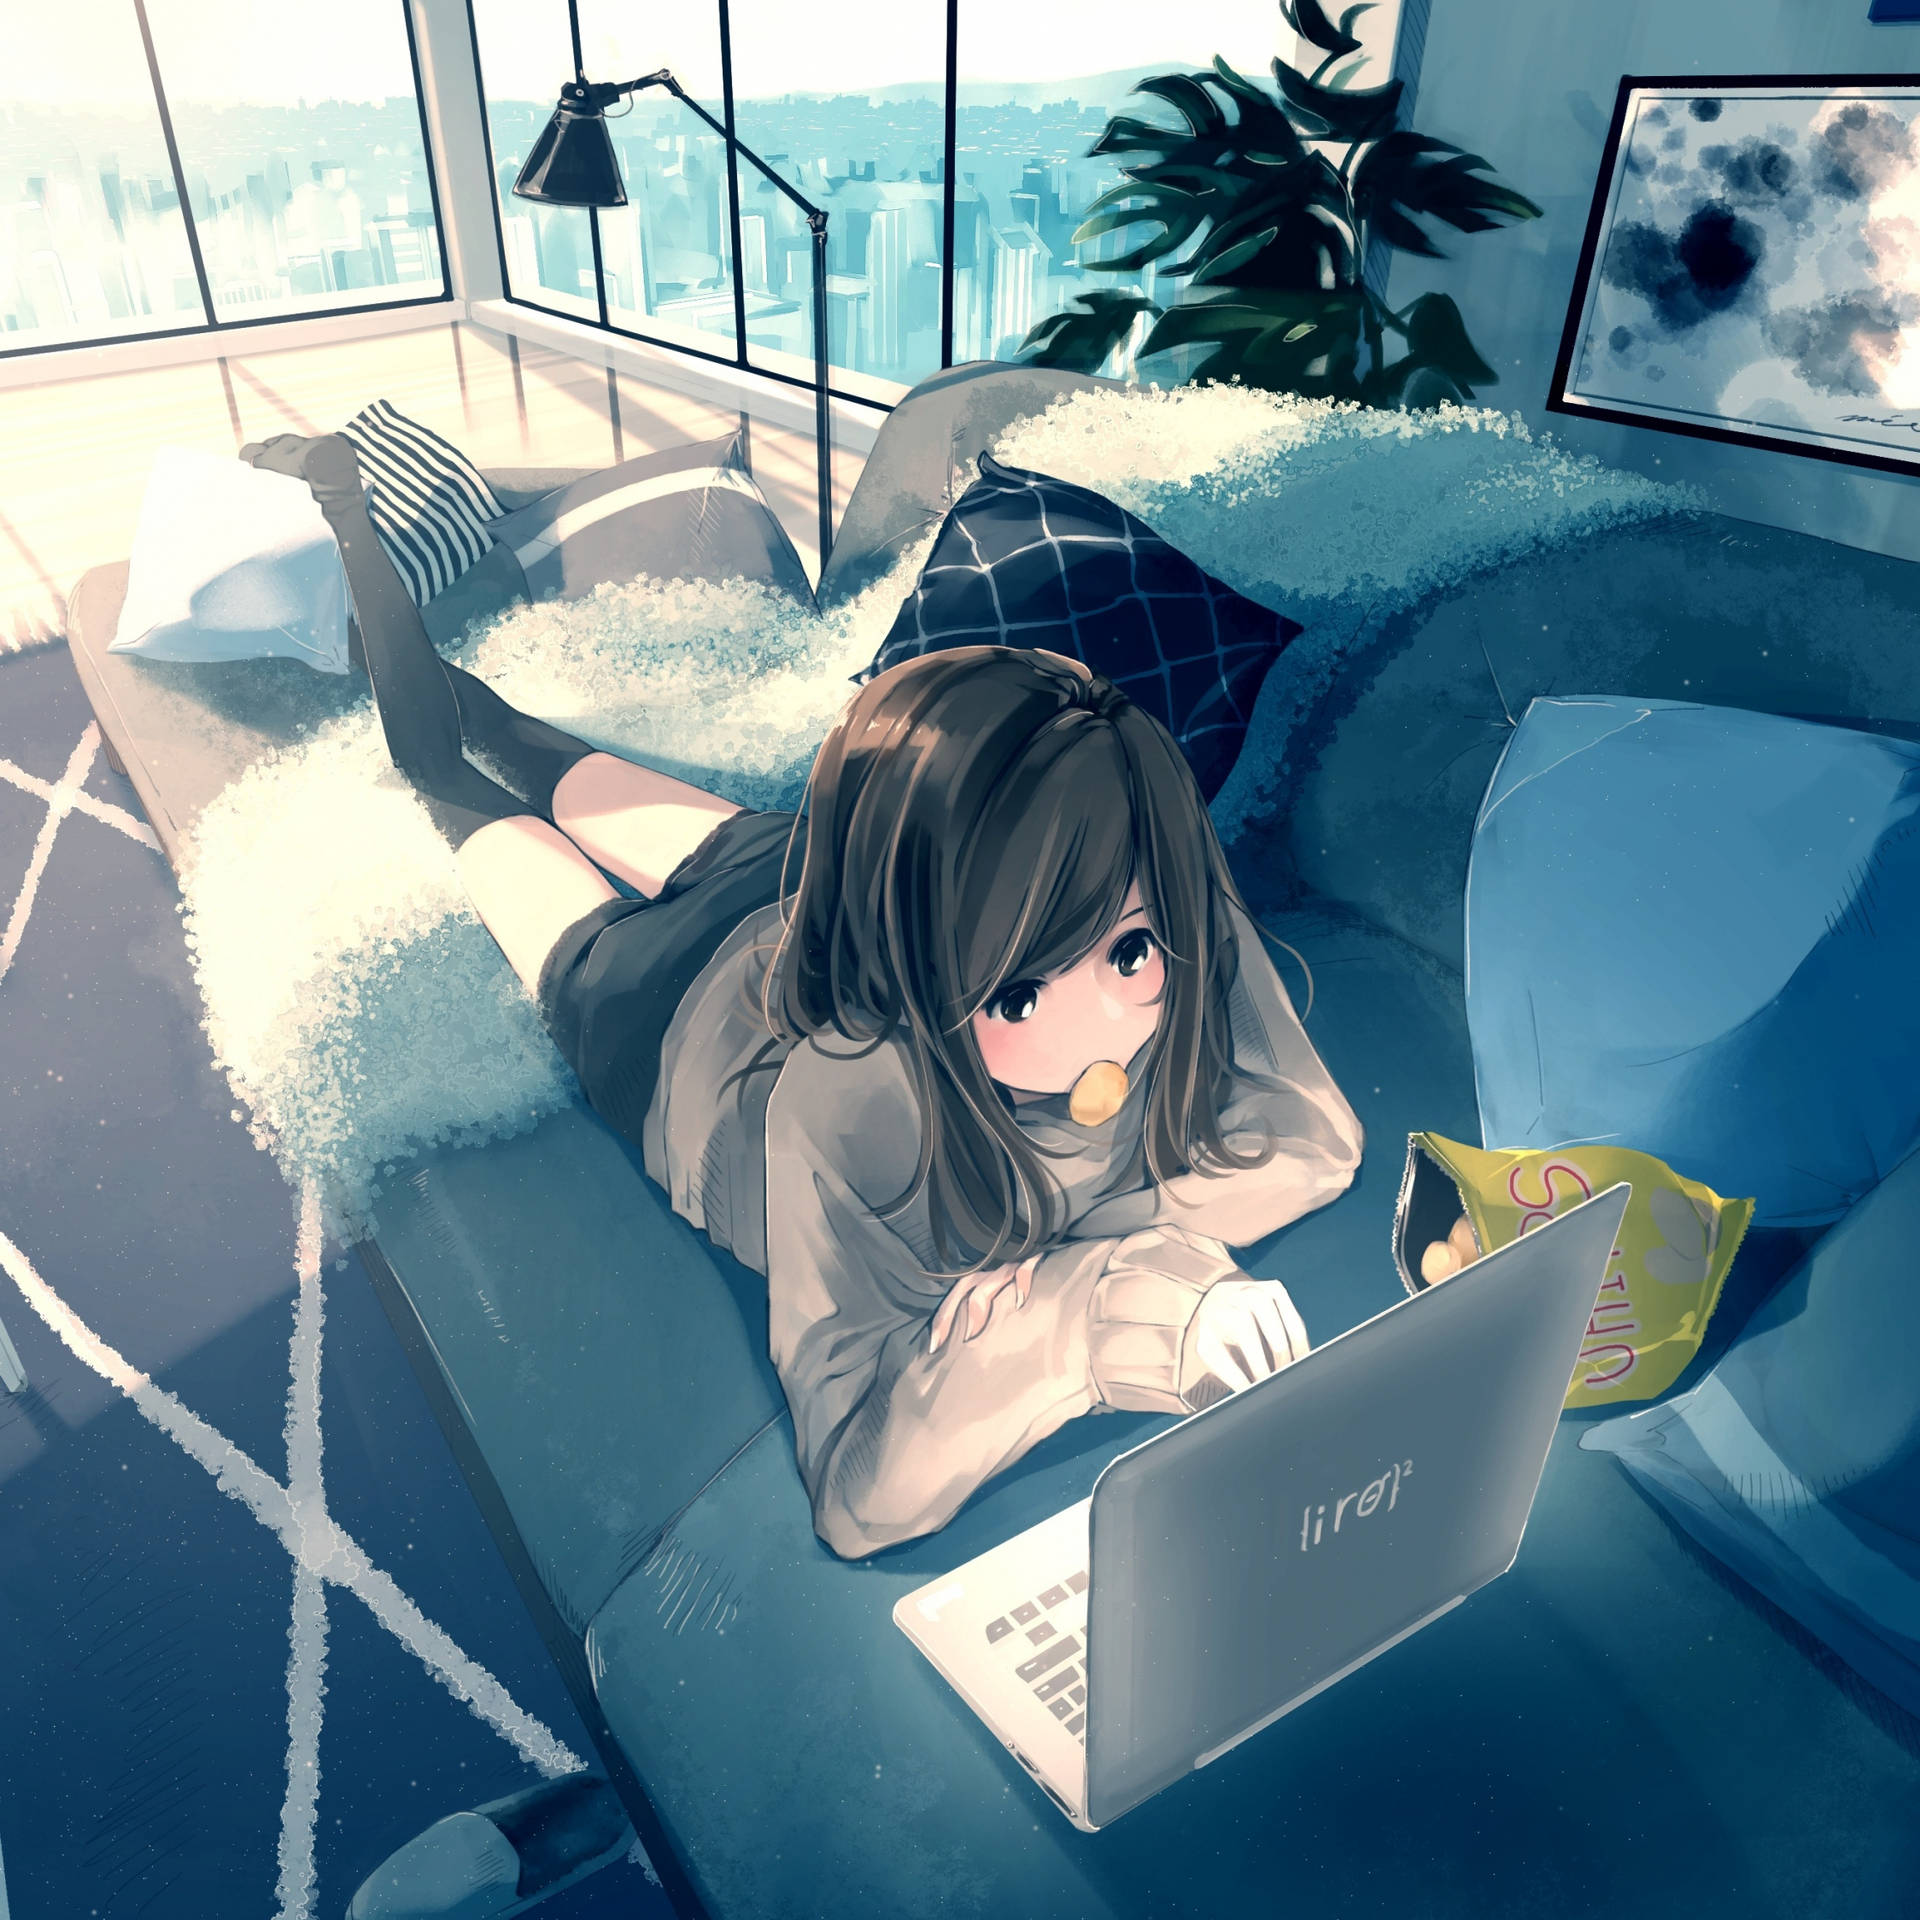 Anime Girl Lies Down Working On Her Laptop